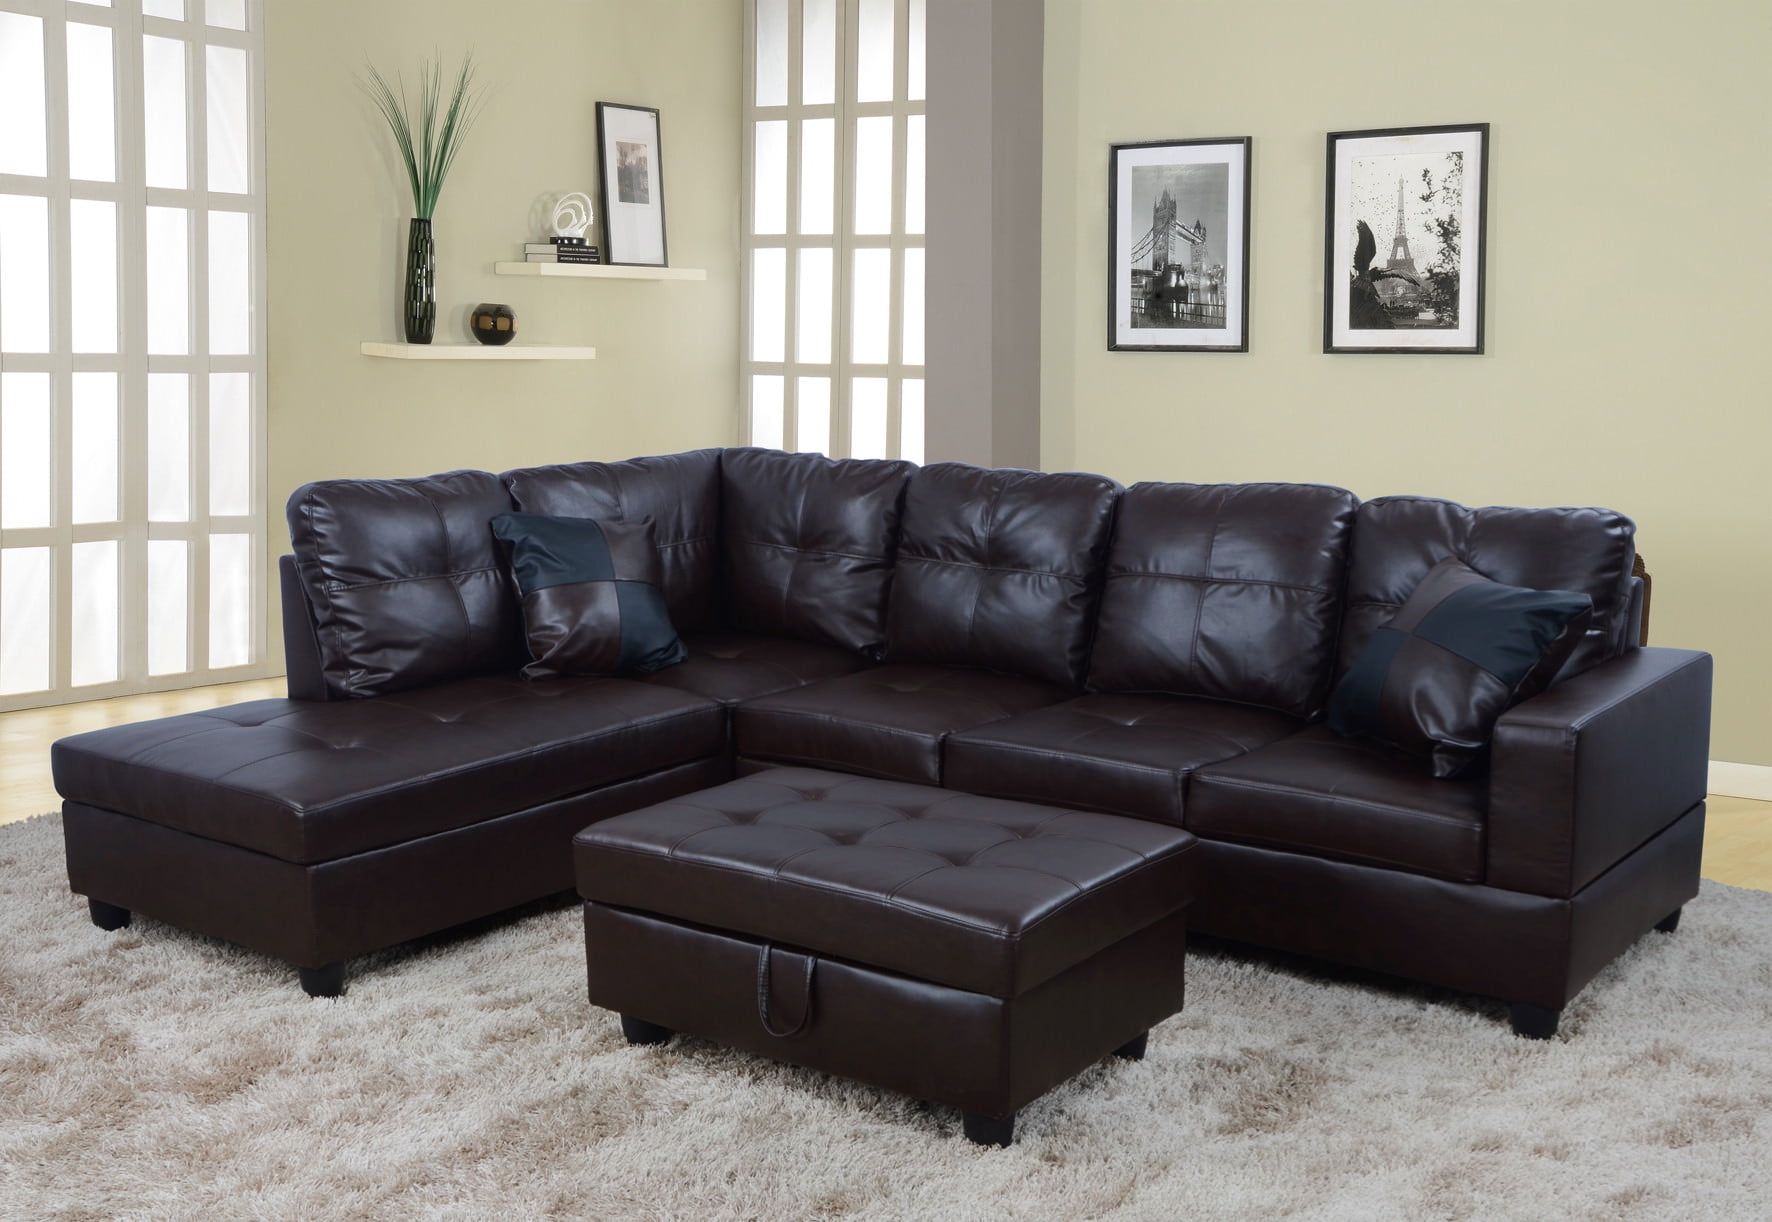 Ponliving Furniture Raphael Brown Faux Leather Left Facing Sectional For Faux Leather Sectional Sofa Sets (View 16 of 21)